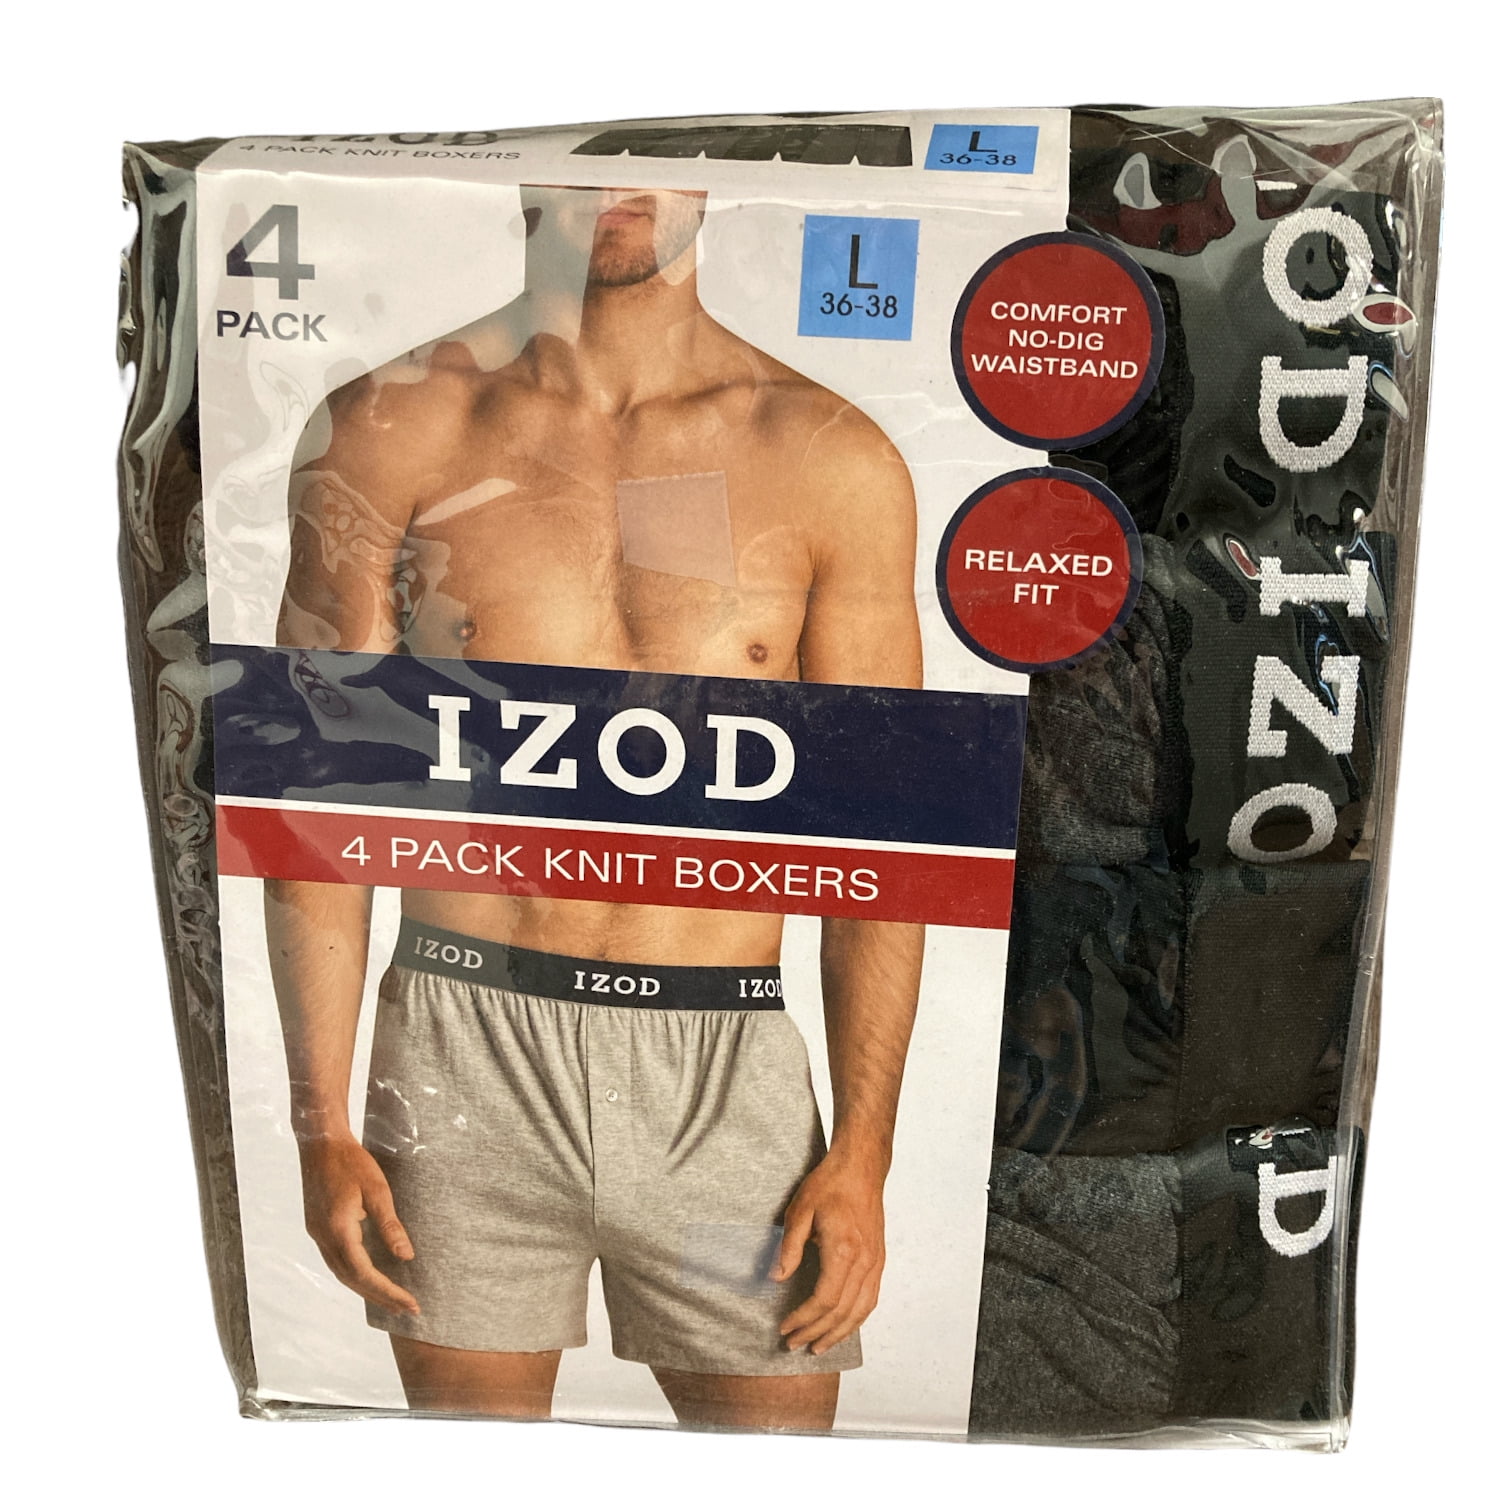 Izod Men's Soft Relaxed Fit Comfort Waistband Knit Boxers, 4 Pack  (Black/Grey, L (36-38))